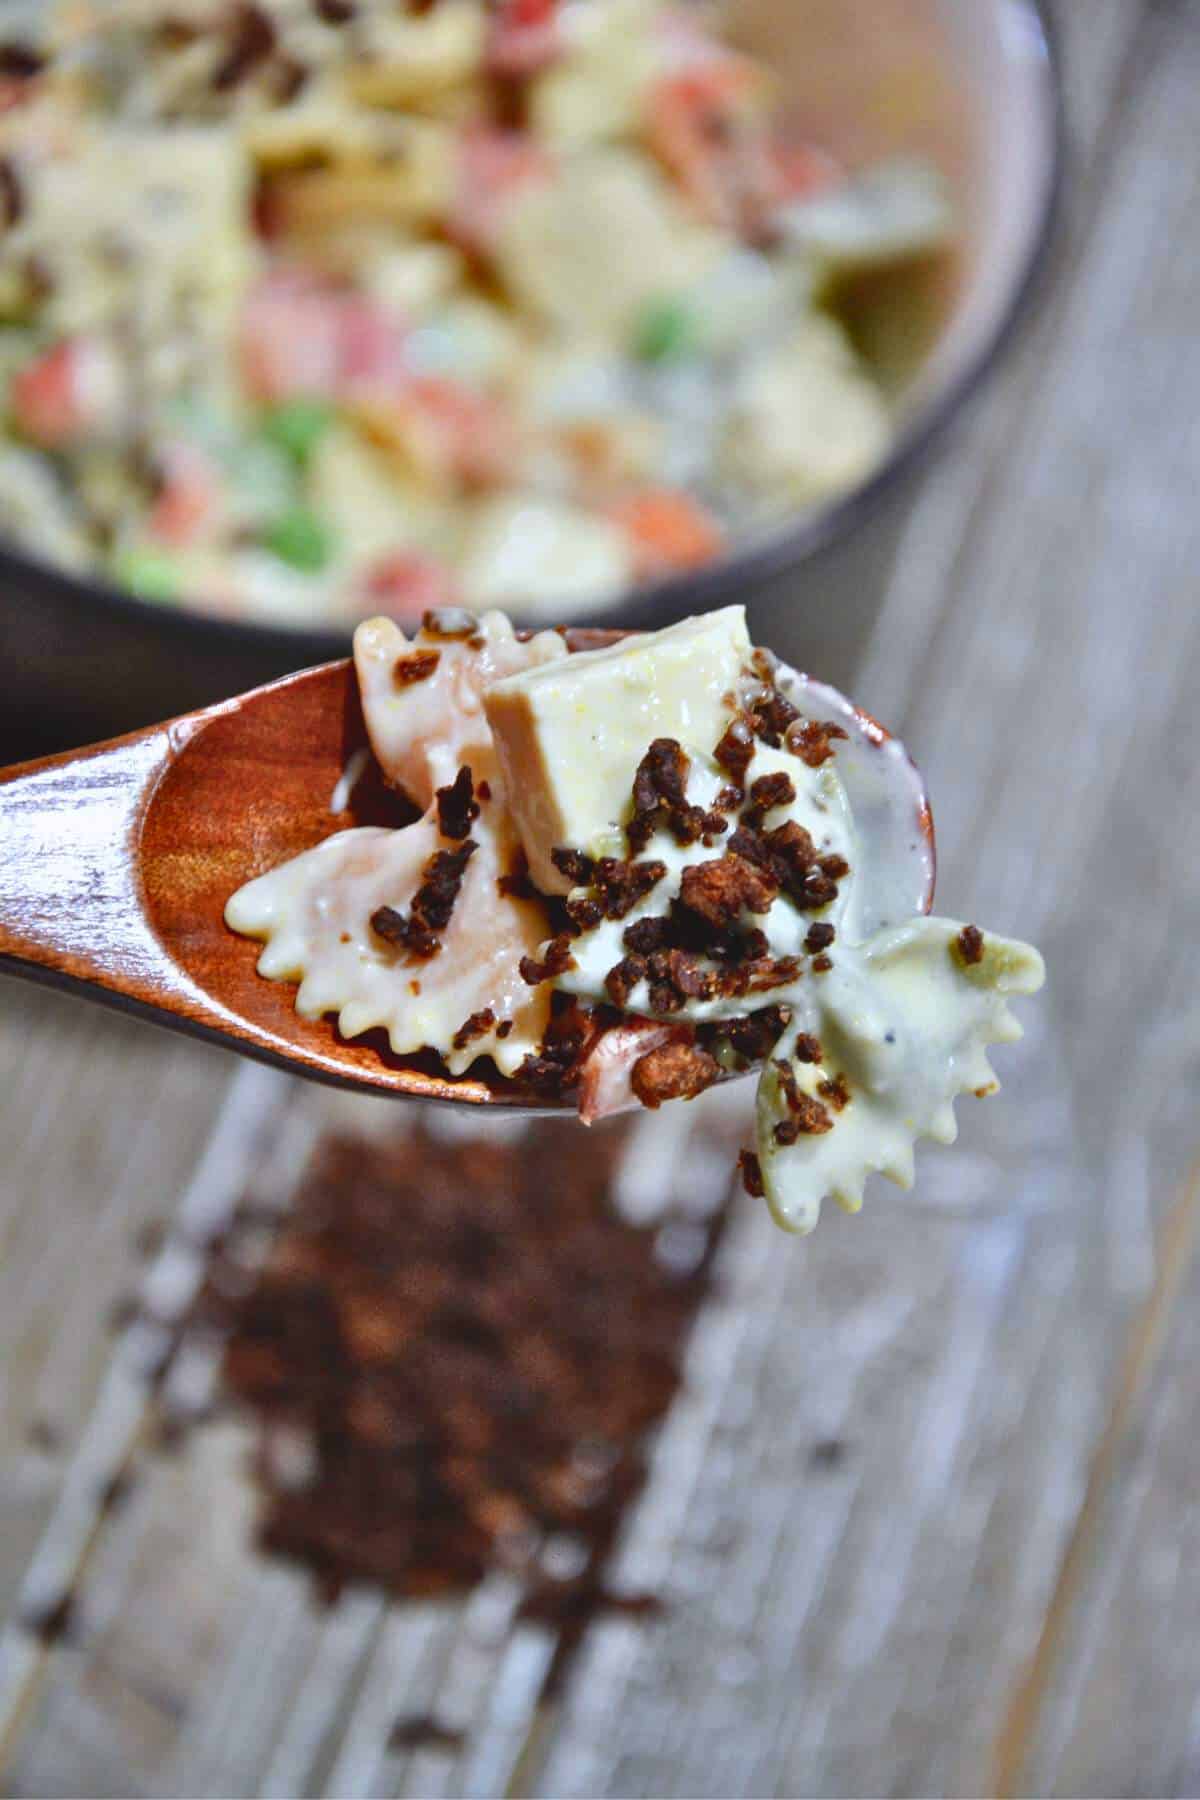 vegan bacon bits topping a salad in a wooden spoon.